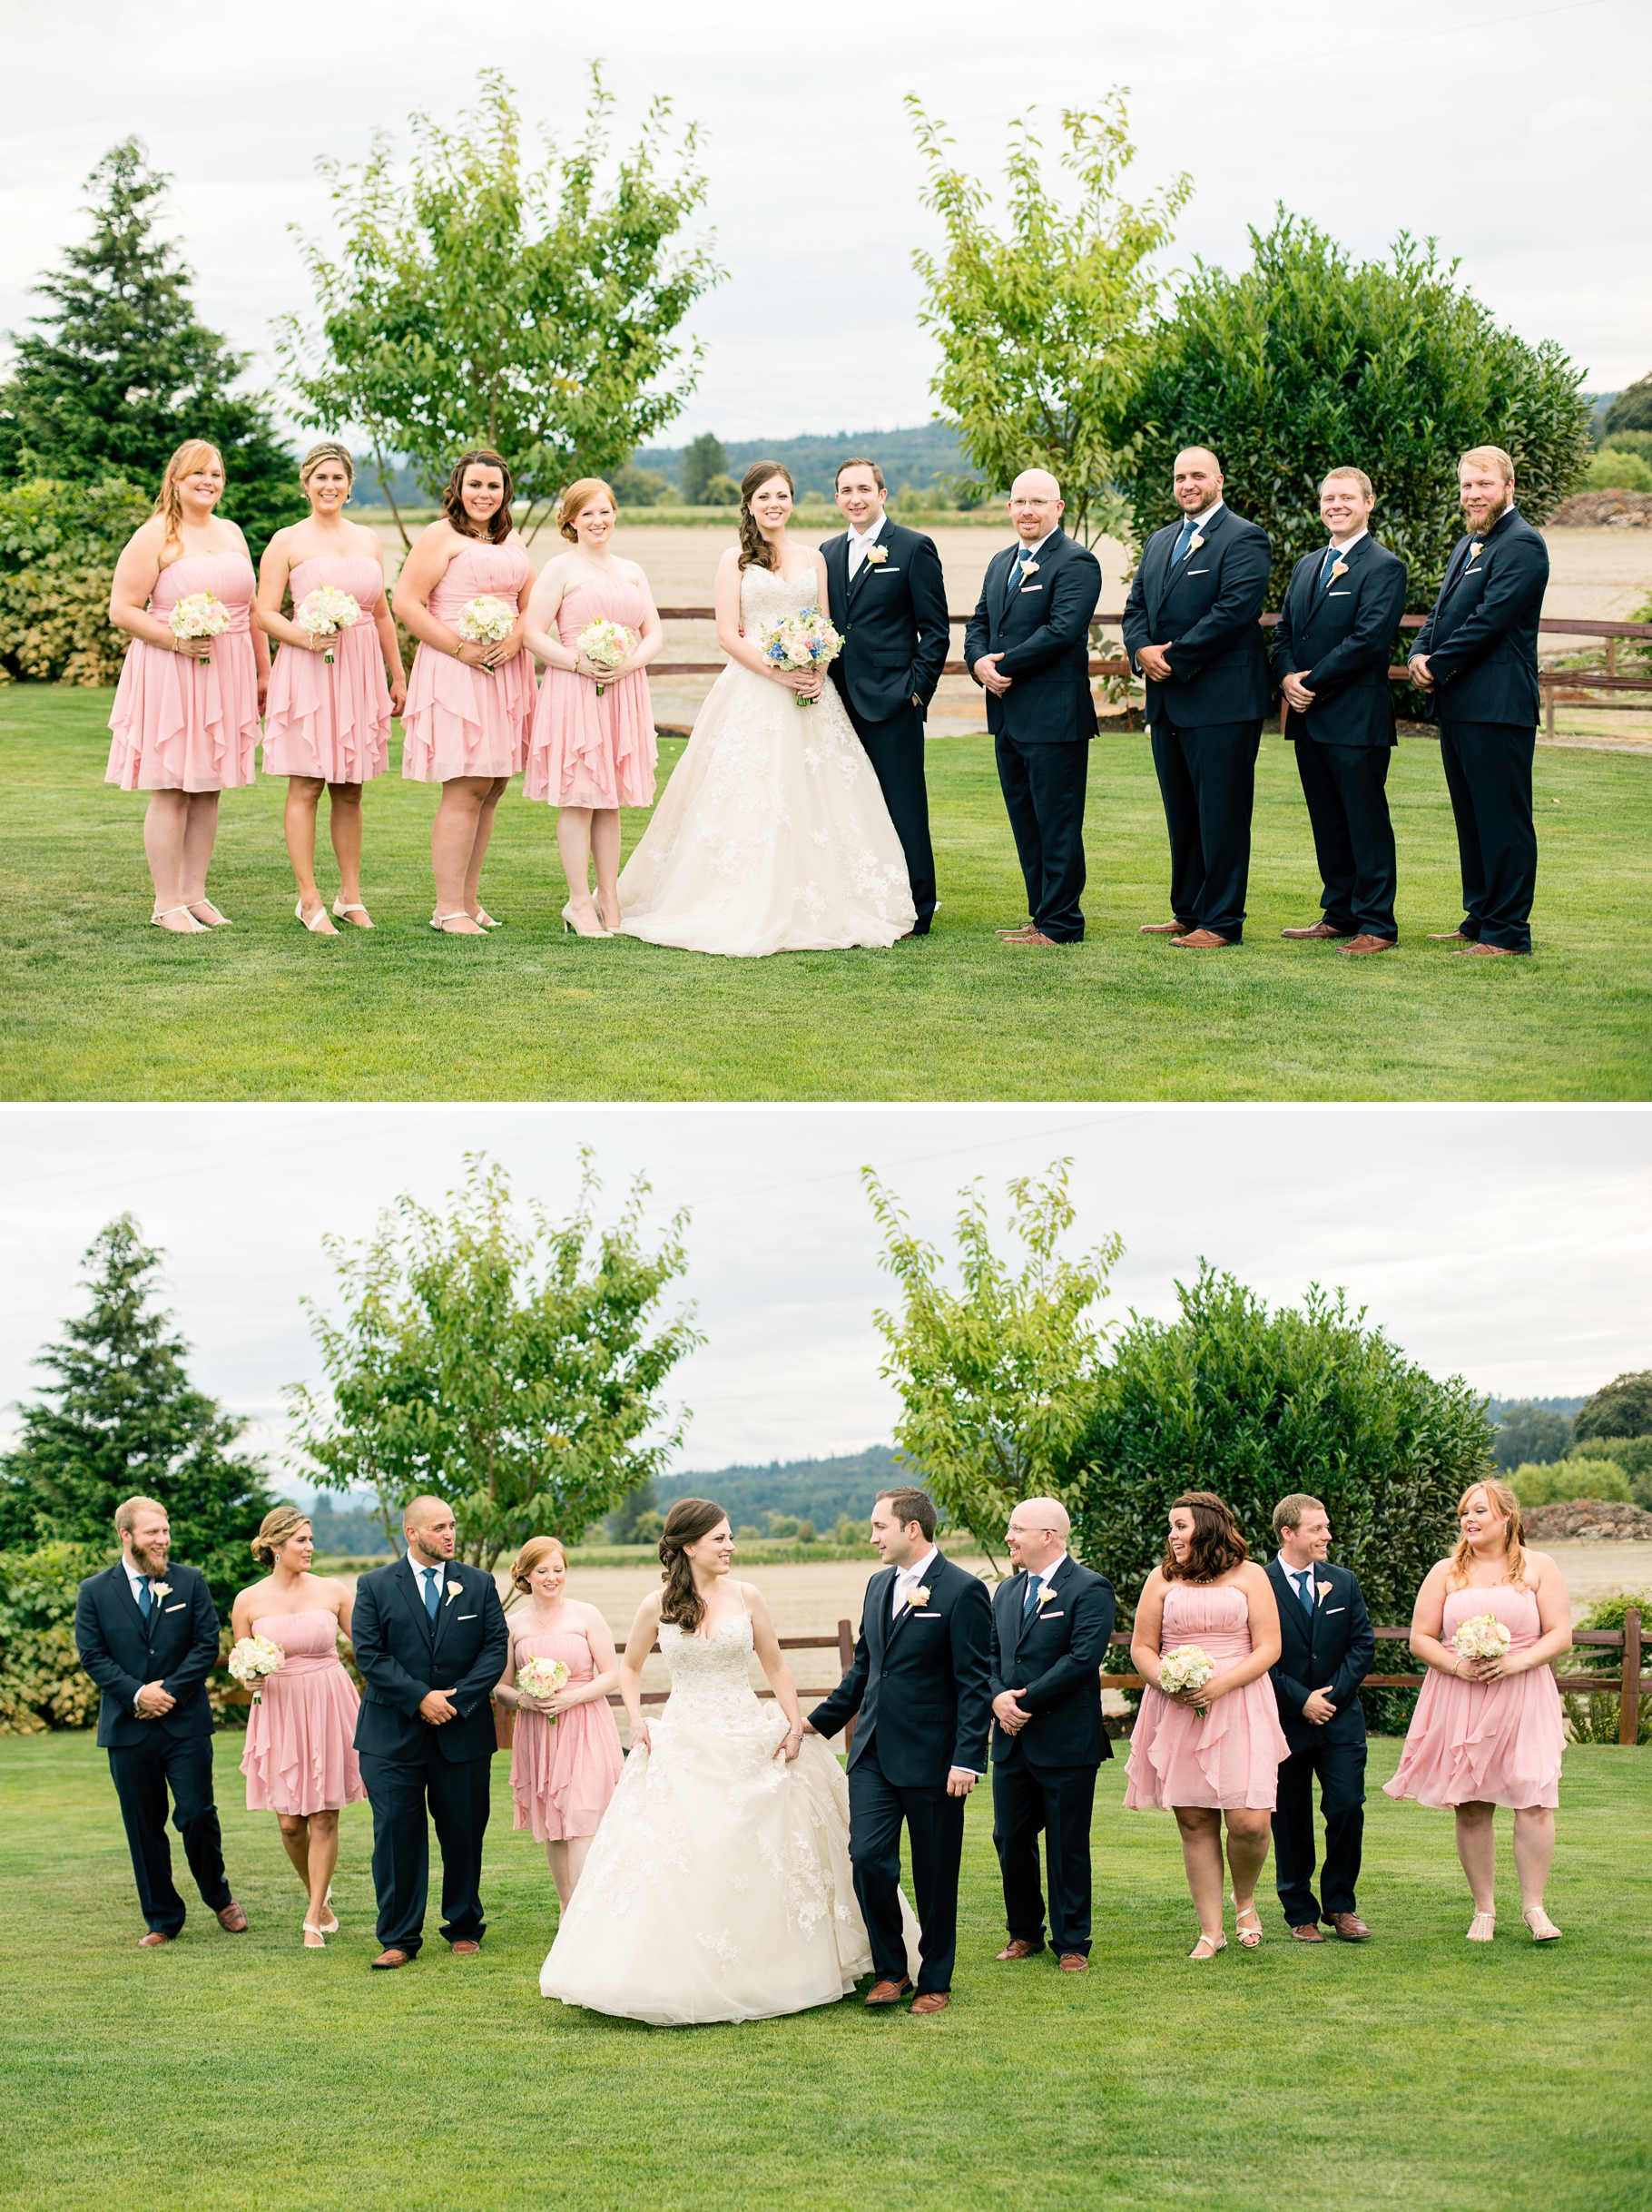 21-Wedding-Party-Portraits-Pink-Gowns-Dresses-Bridesmaids-Navy-Suits-Groomsmen-Hidden-Meadows-Snohomish-Wedding-Photographer-Northwest-Seattle-Photography-by-Betty-Elaine